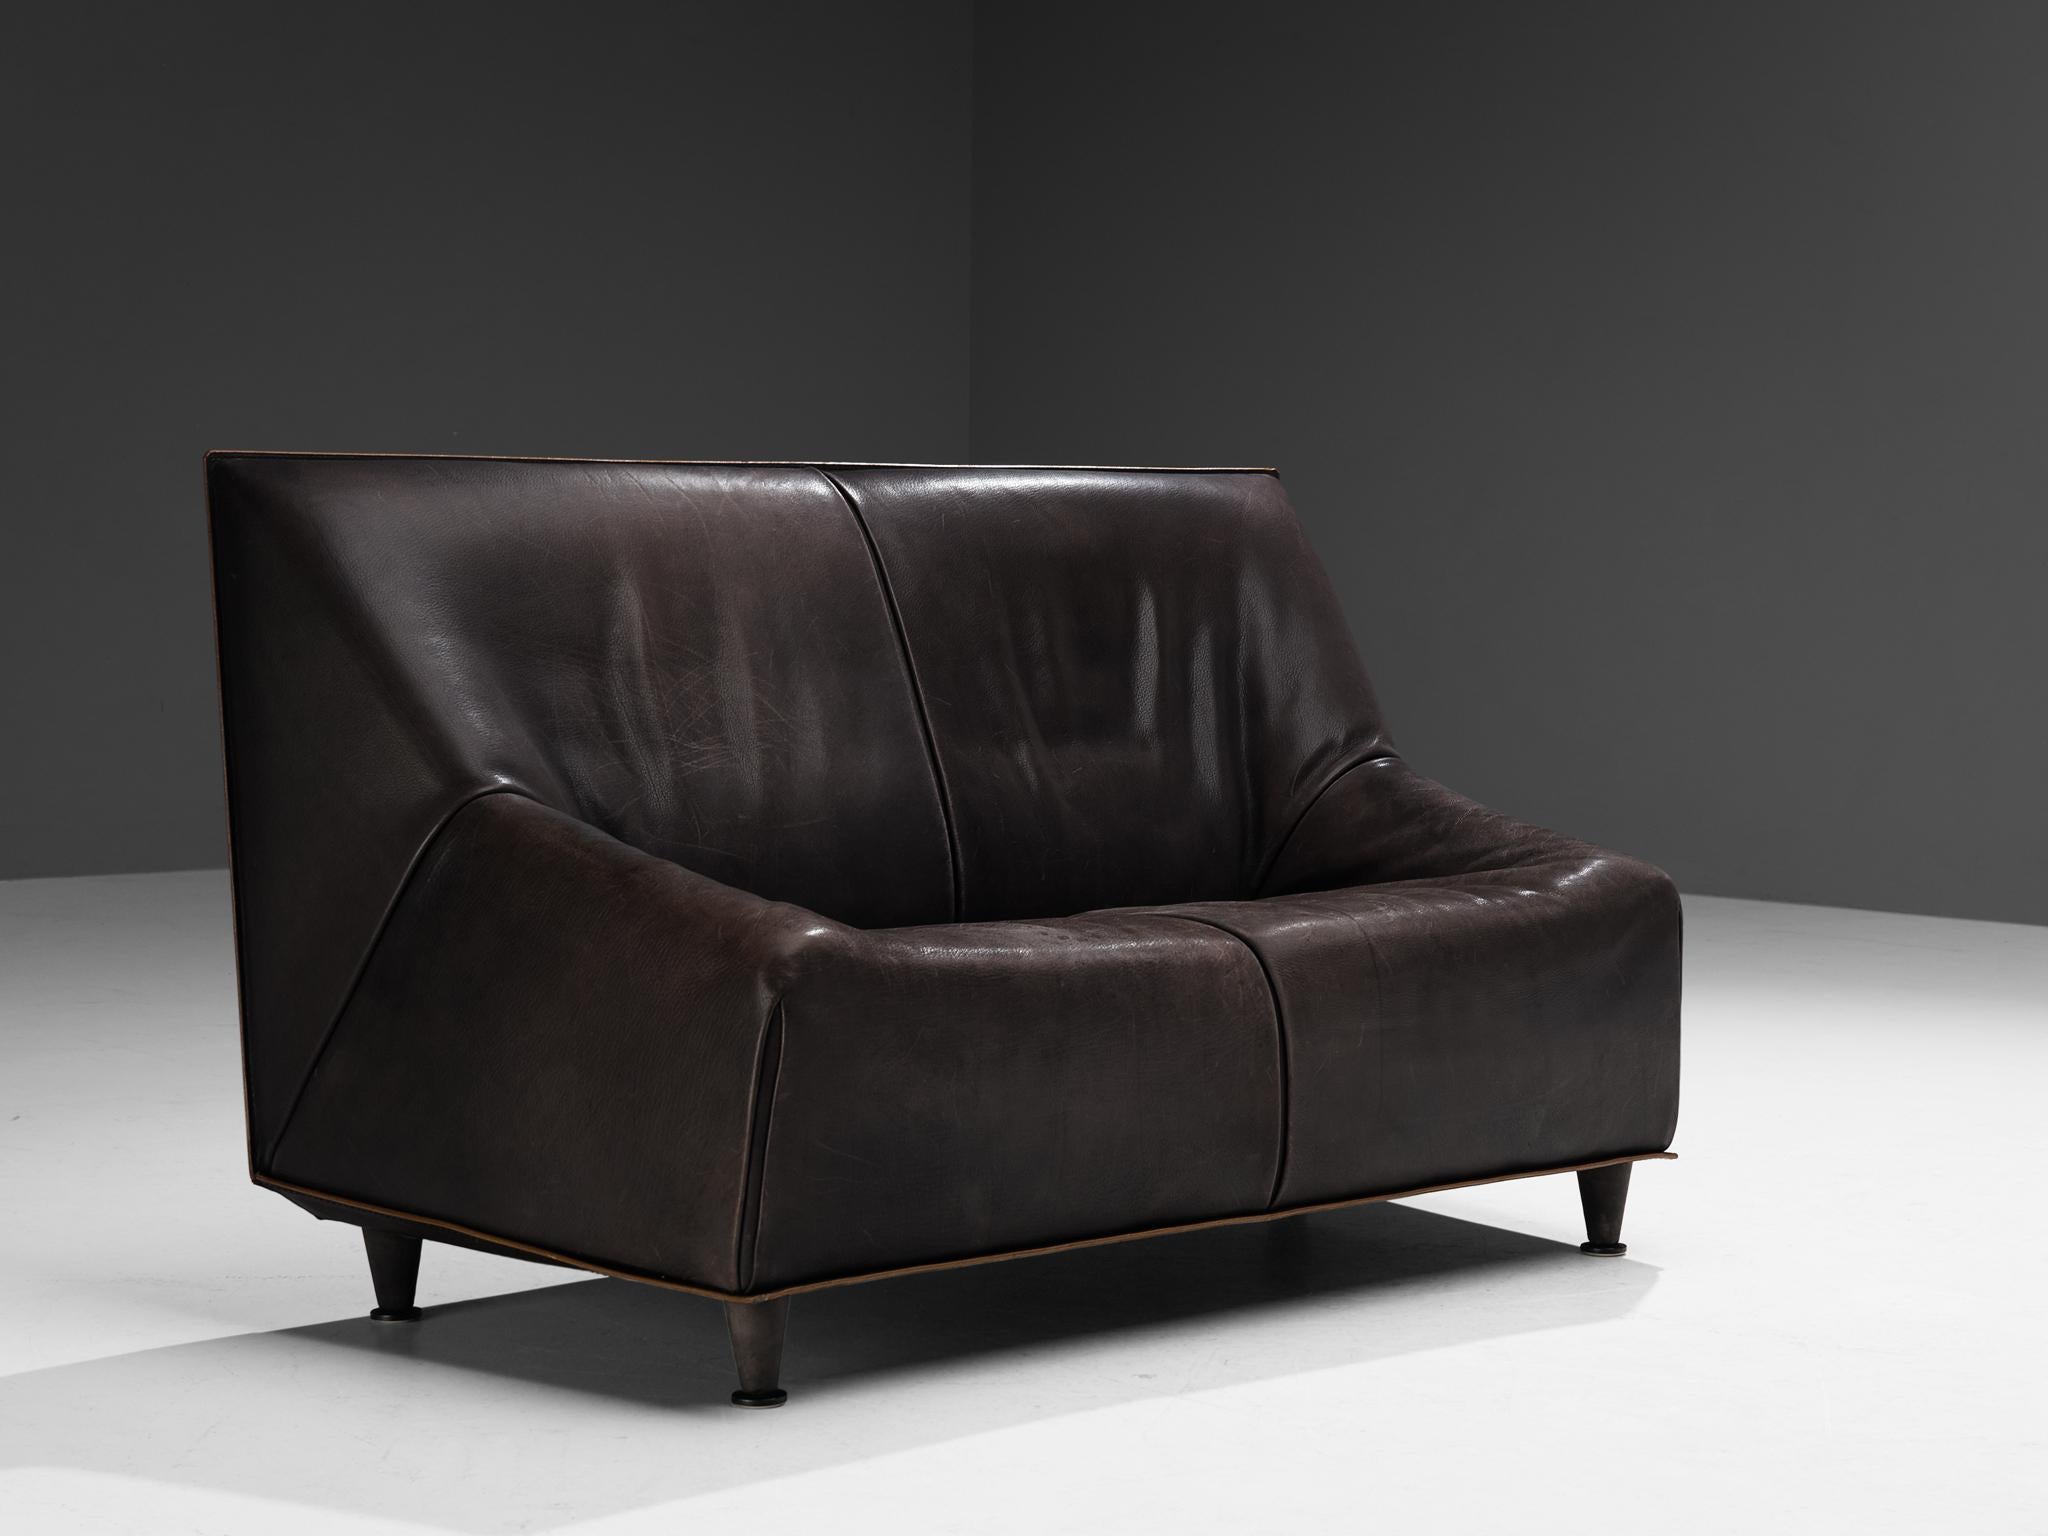 Sofa or settee, buffalo leather, metal, Denmark, 1960s. 

This sofa originates from Denmark and is characterized by a cubic shaped construction fully executed in buffalo leather with admirable patina. The seat epitomizes strong lines that gracefully